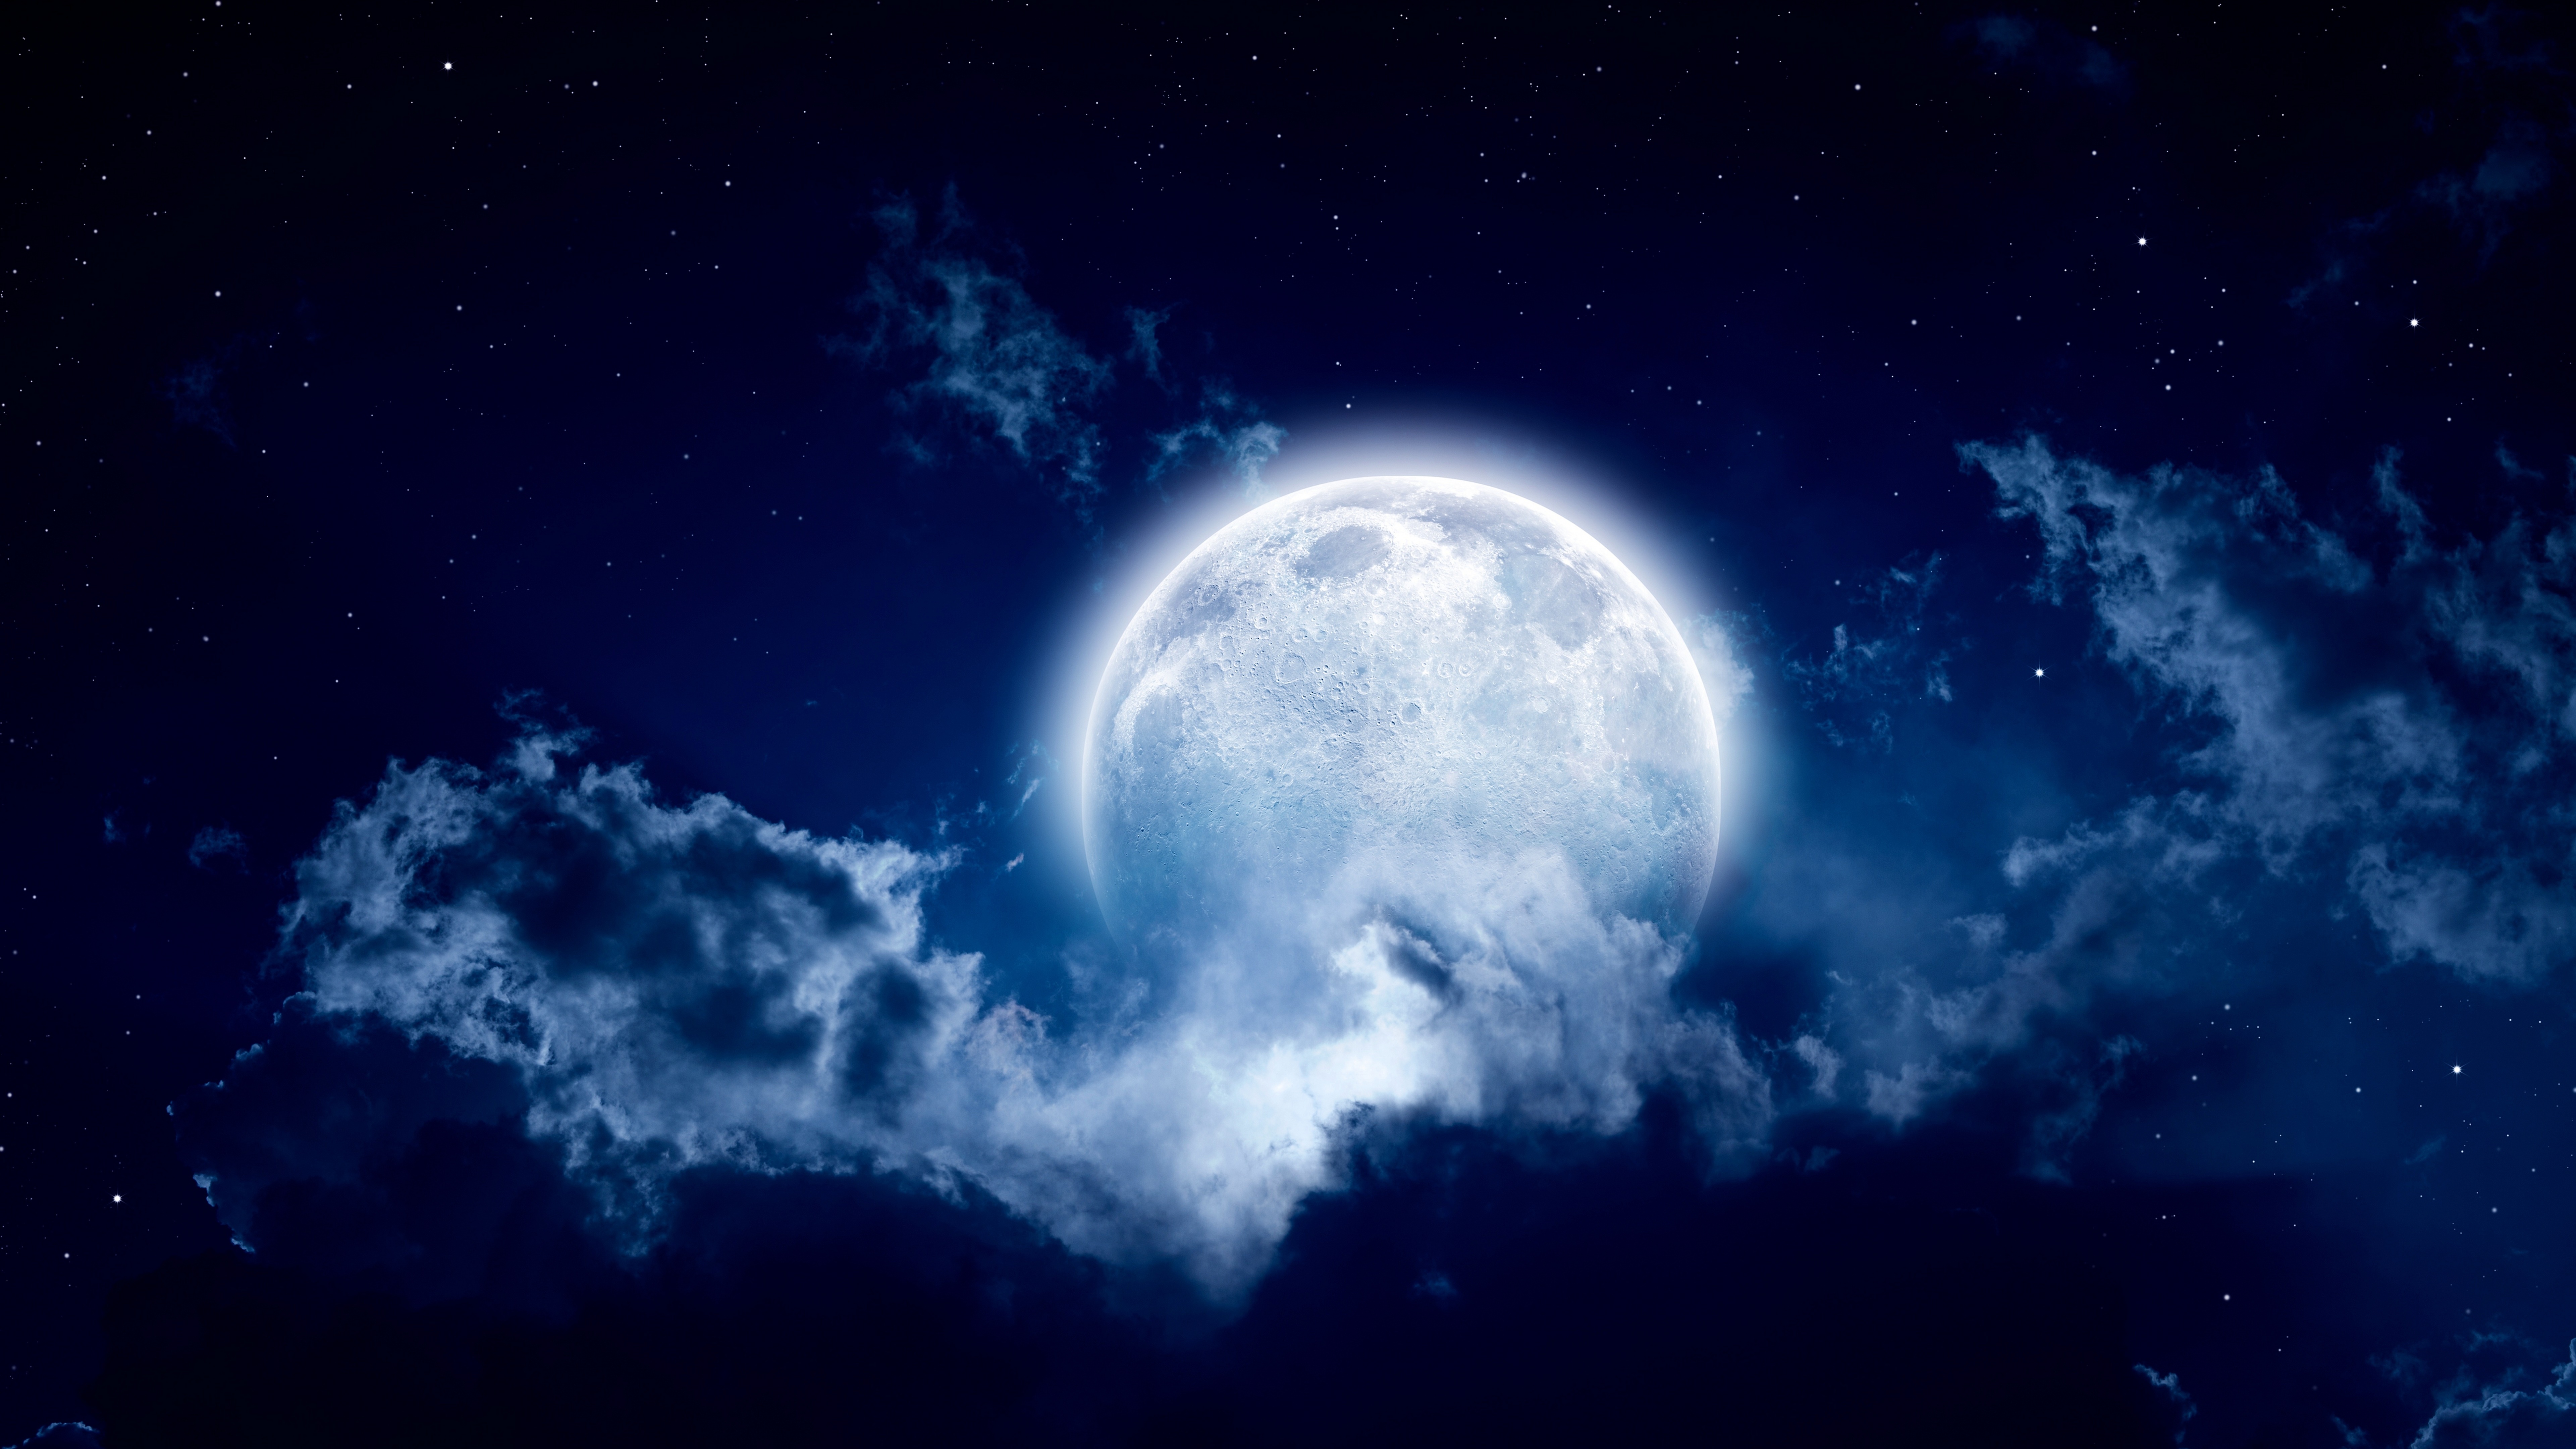 Full moon in the night sky wallpaper - backiee